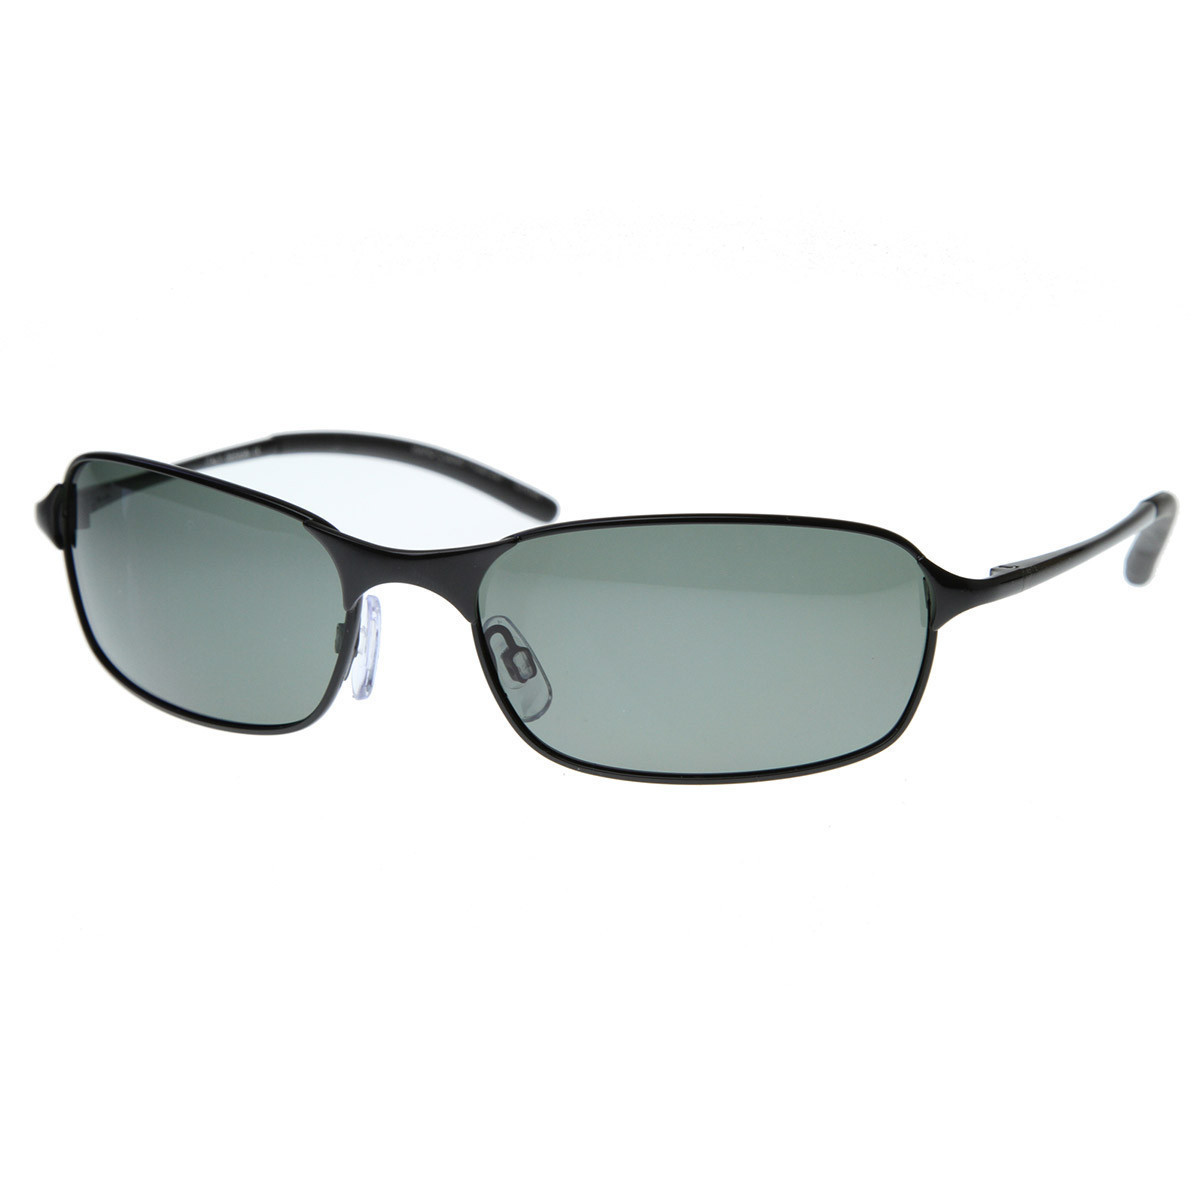 Polarized Thin Wire Frame Metal Sunglasses - 8321 - Silver